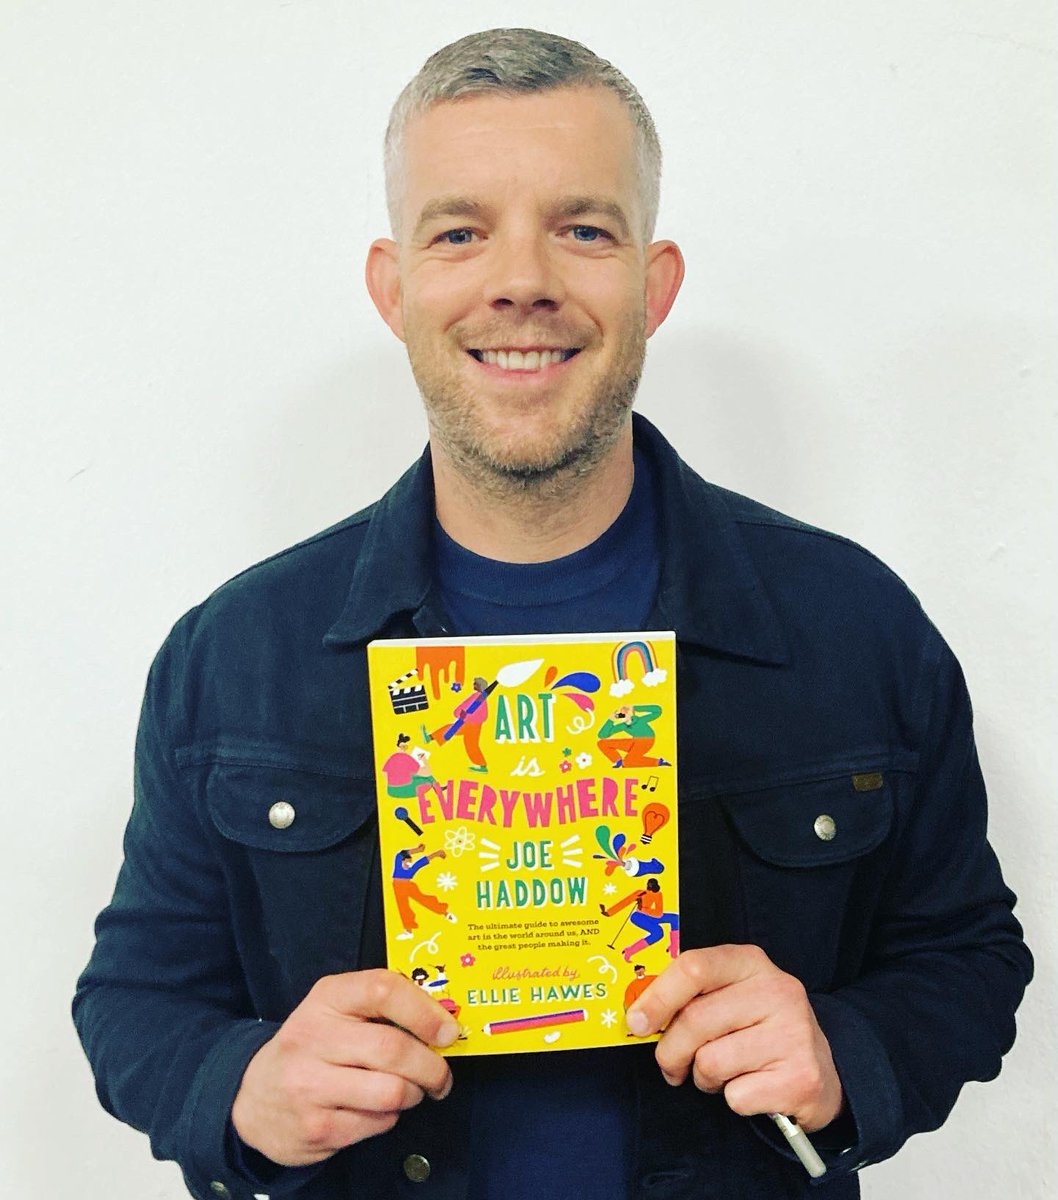 Oh nothing much to see here… …just the lovely @russelltovey showing off his copy of ‘Art Is Everywhere’ 🥰 (pre-order now 👇) joehaddow.com #artiseverywhere #childrensbook #kidsbooks #books #acting #art #writing #booksforchildren #russelltovey @publishinguclan